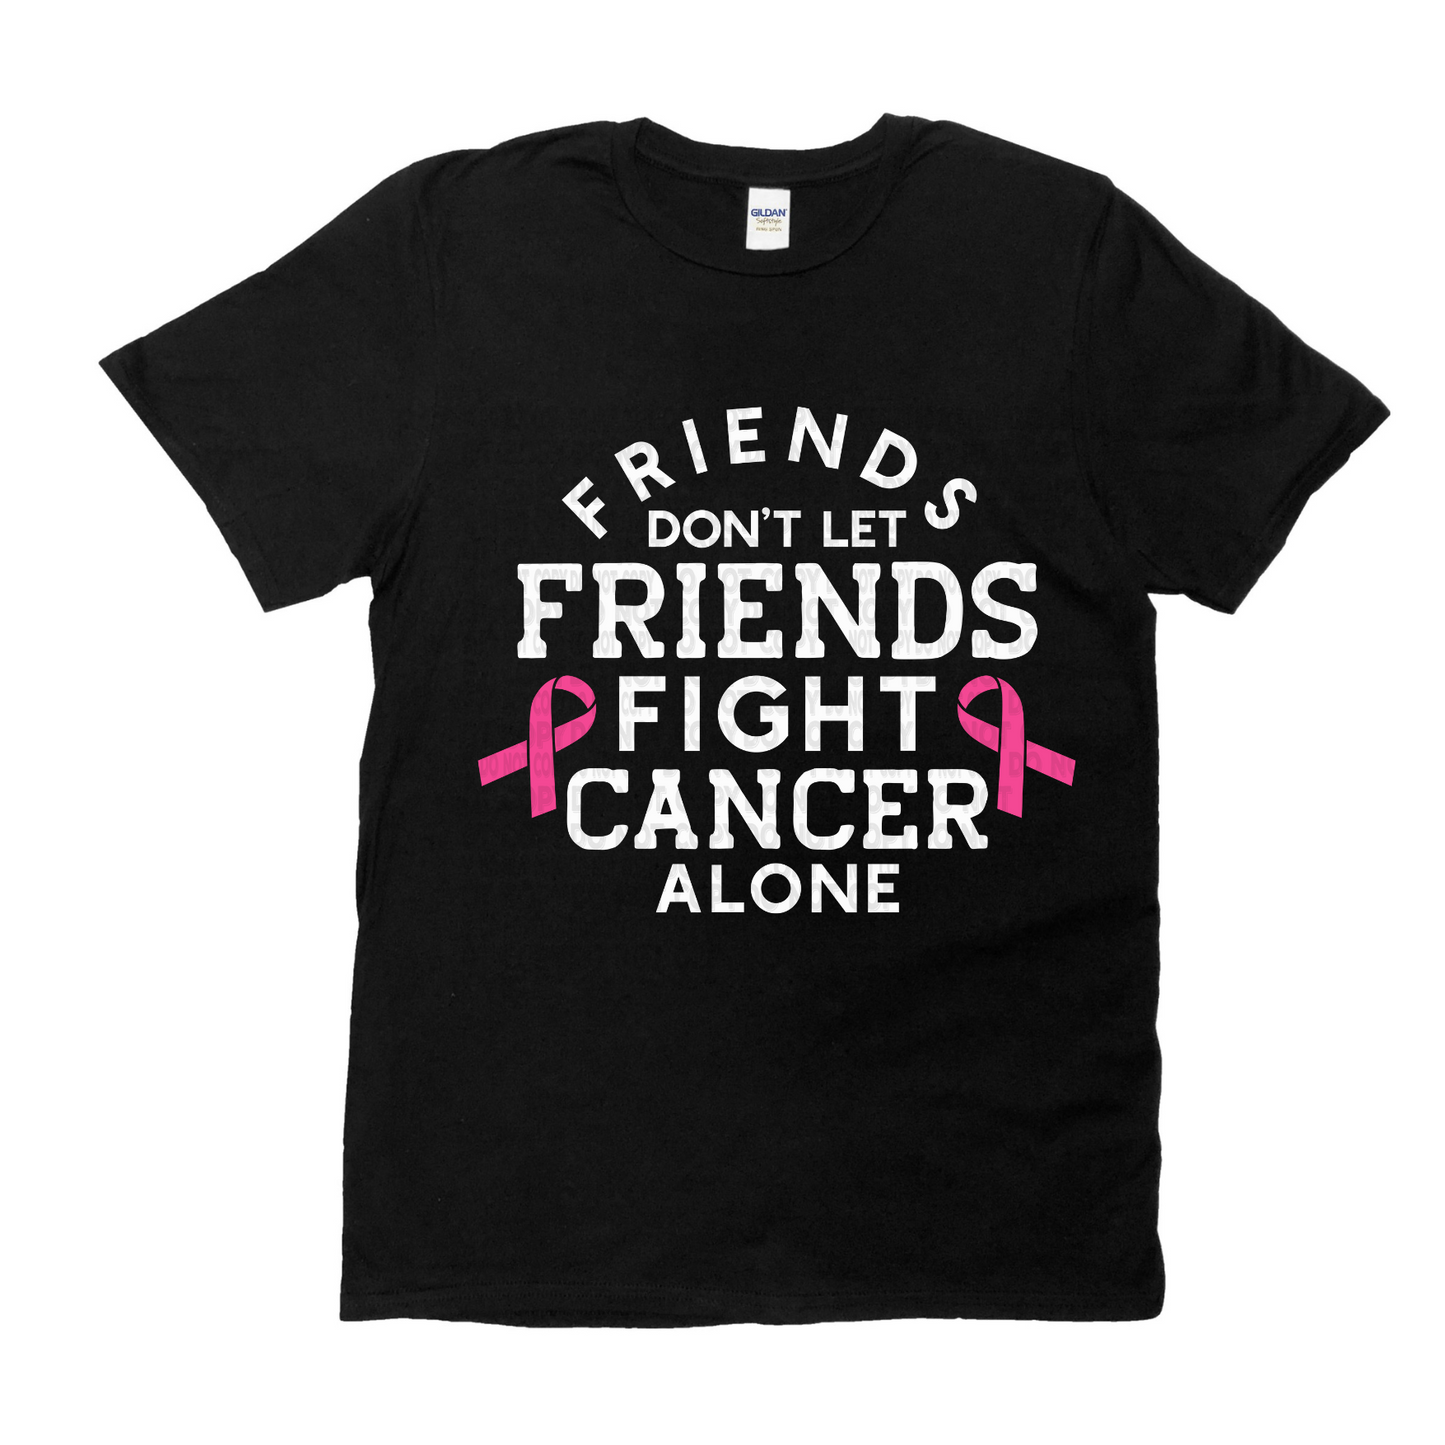 Friends with Cancer Dont Fight Alone